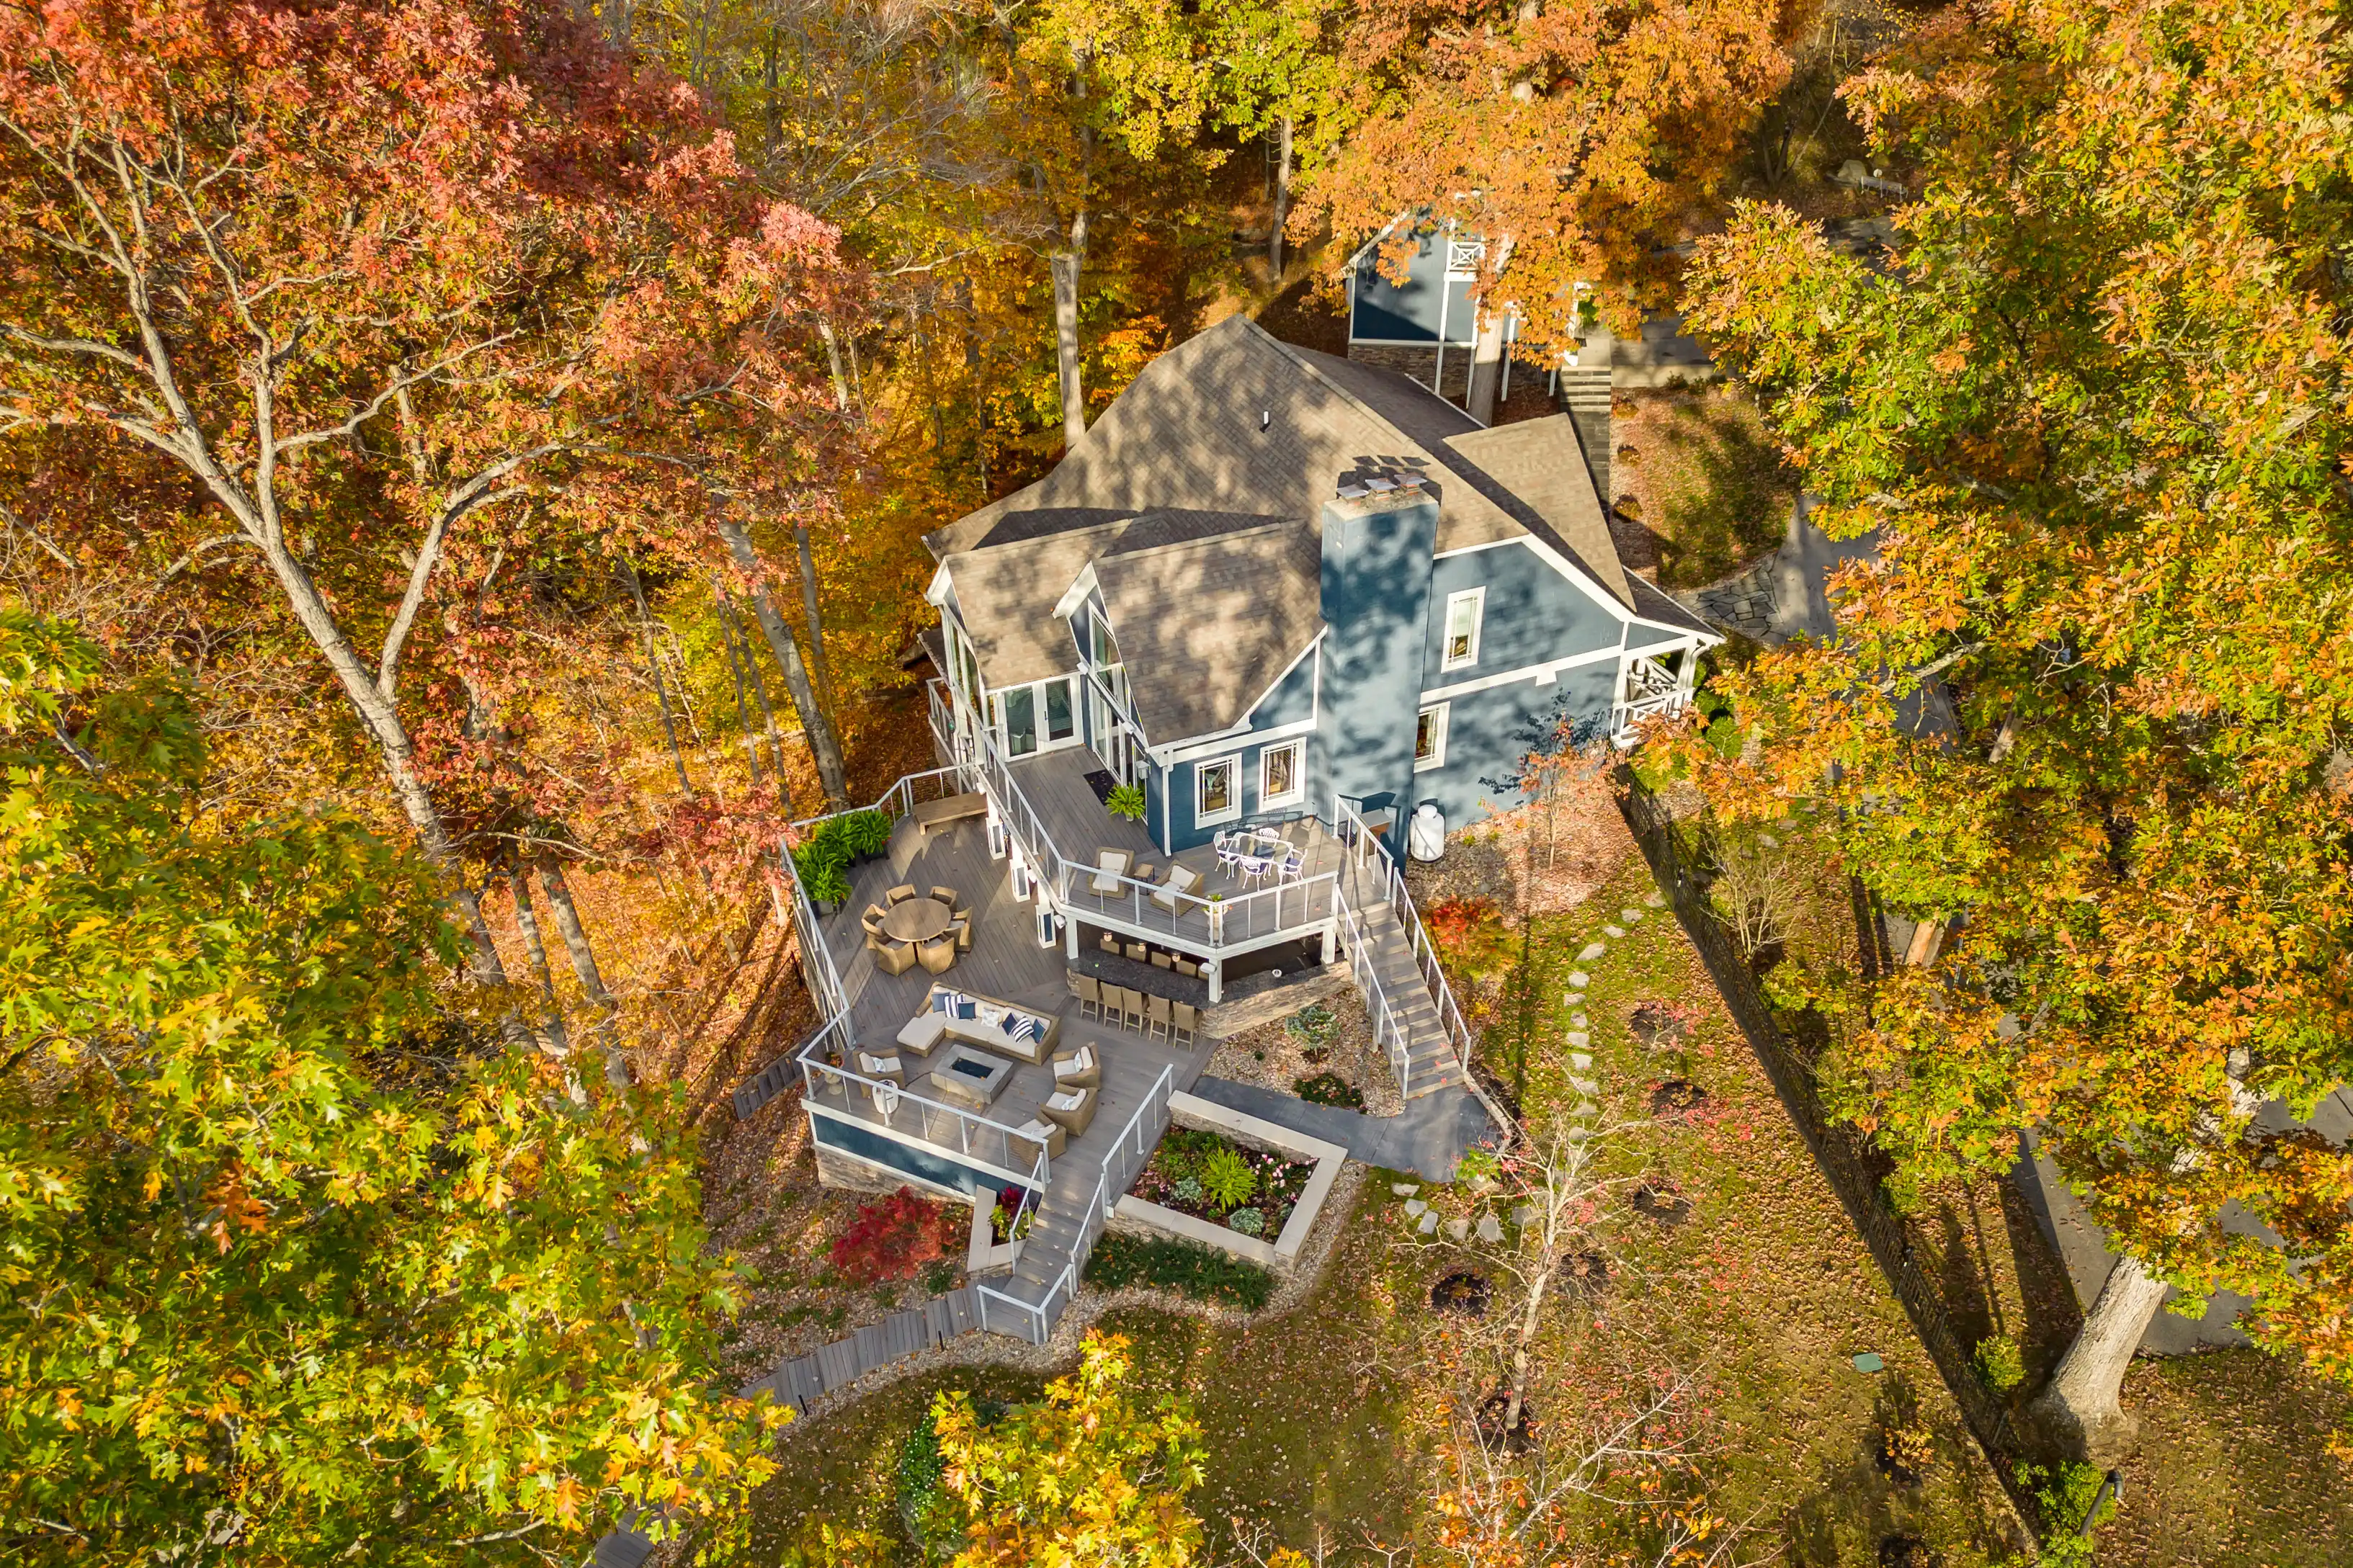 Aerial view of a two-story house with a gray roof and multiple decks surrounded by trees with autumn foliage.